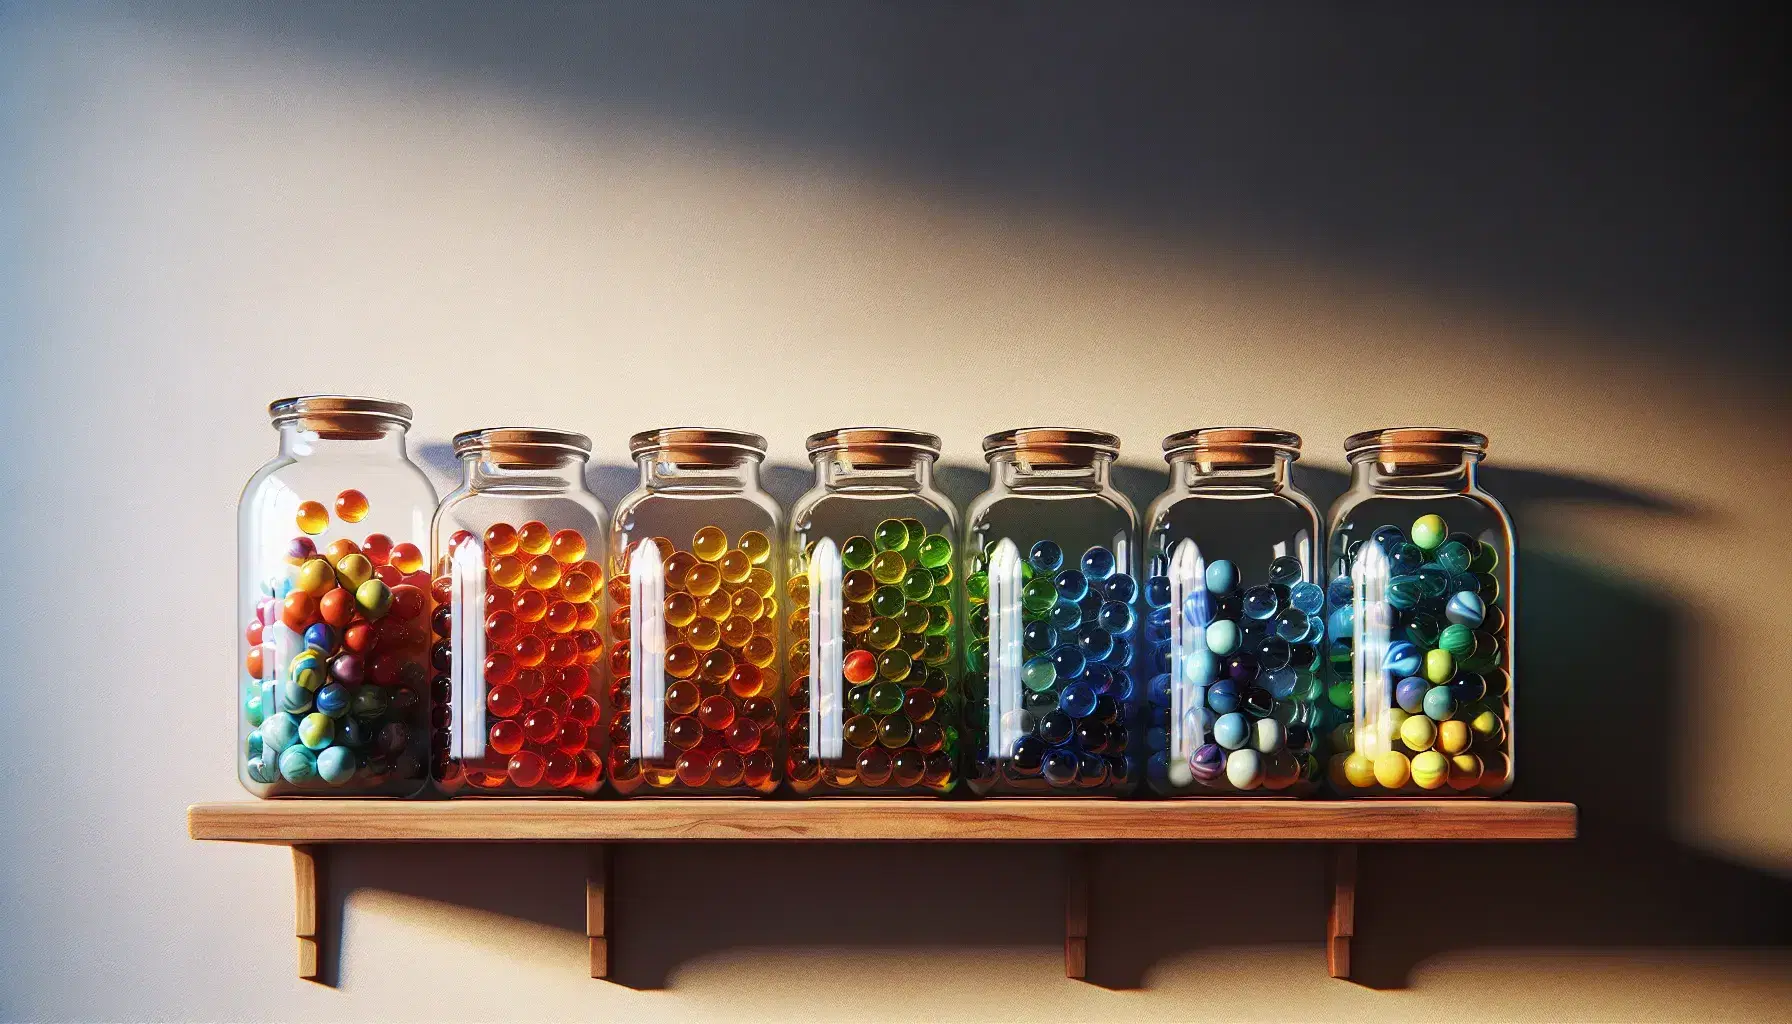 Collection of glass jars on a wooden shelf, each filled with marbles in rainbow colors, decreasing in quantity and increasing in size from red to violet.